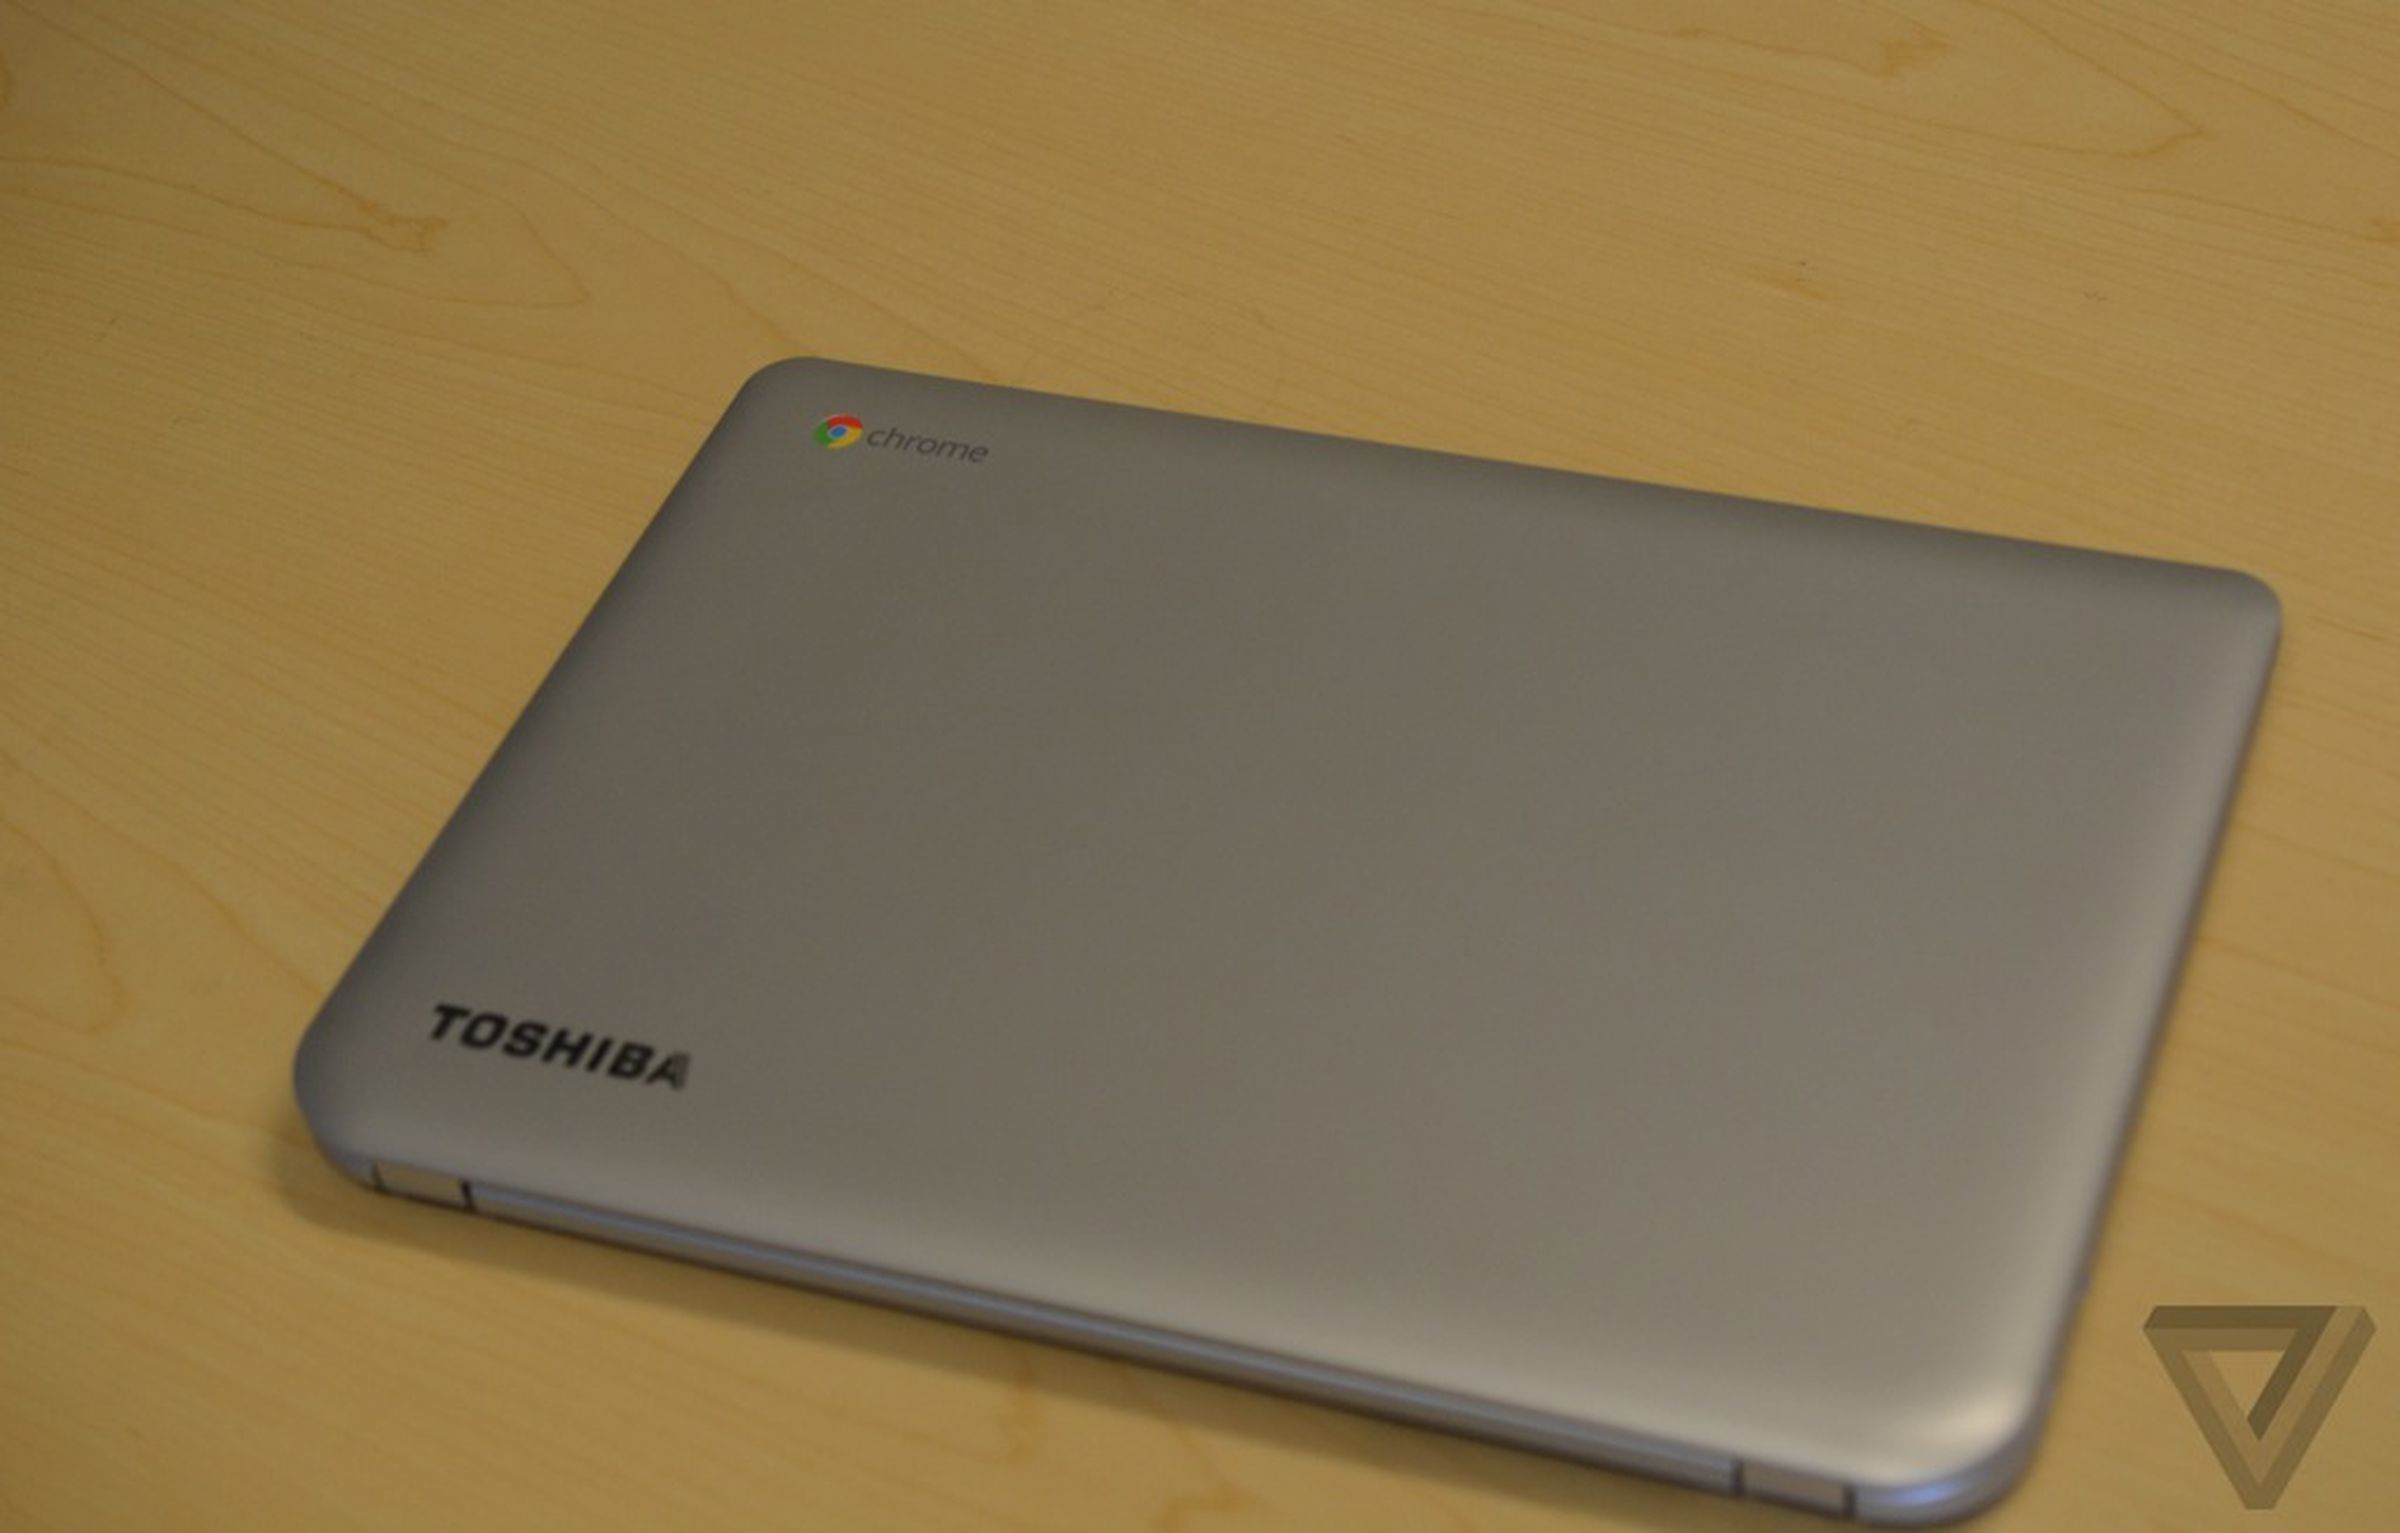 Toshiba Chromebook hands-on pictures